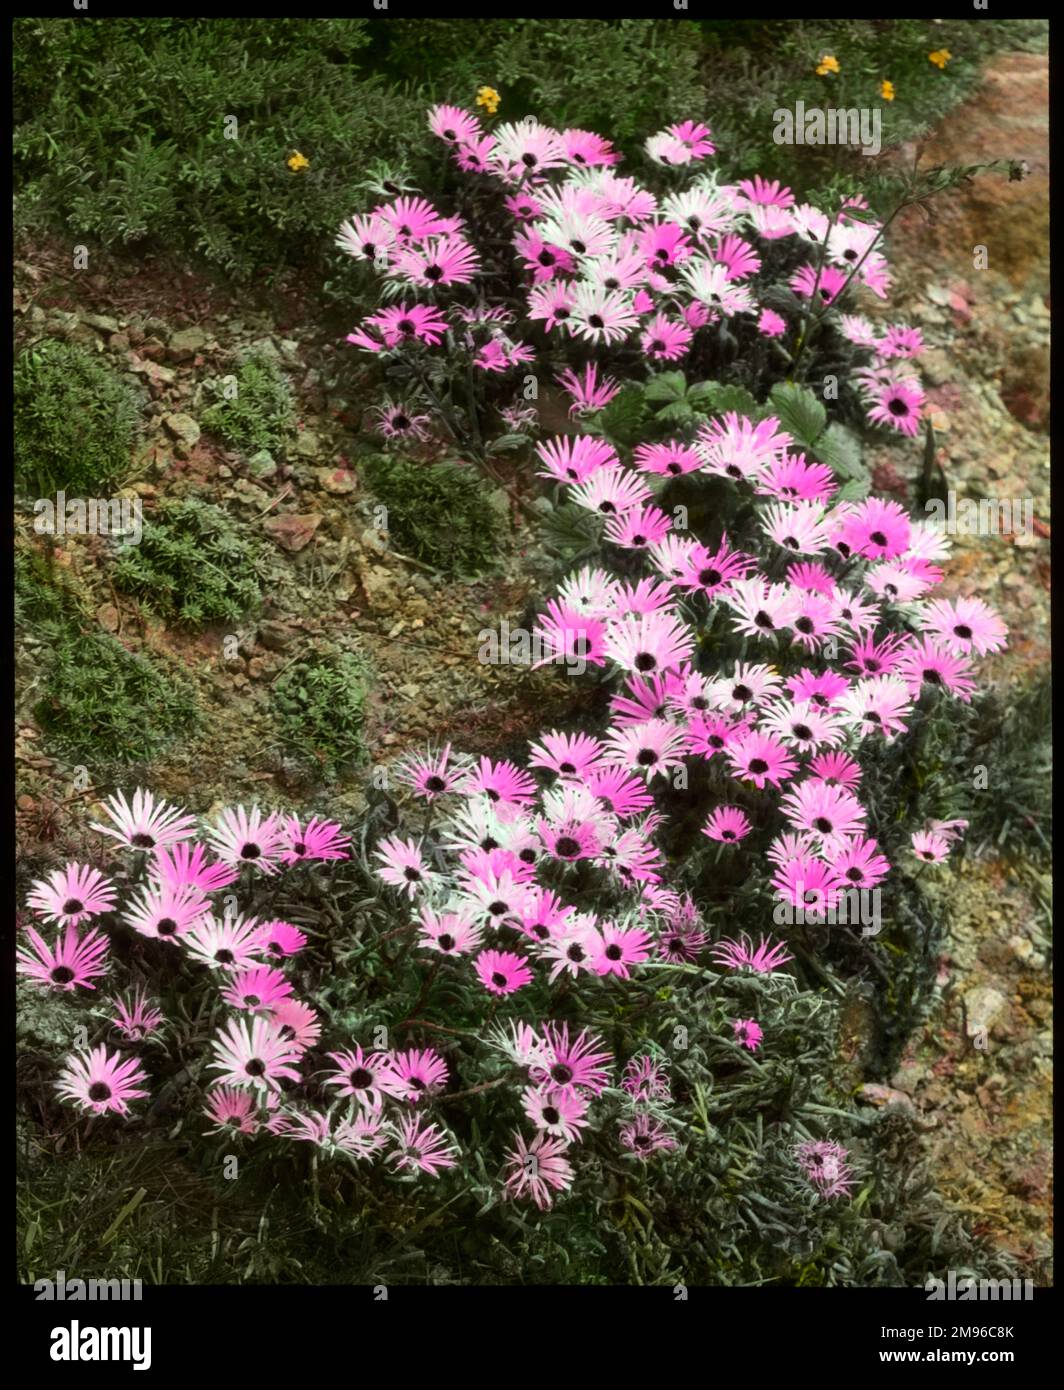 Mesembryanthemum (Midday Flowering) Tricolor, a flowering plant of the Aizoaceae family native to southern Africa with daisy-like petals in three different shades of pink. Stock Photo